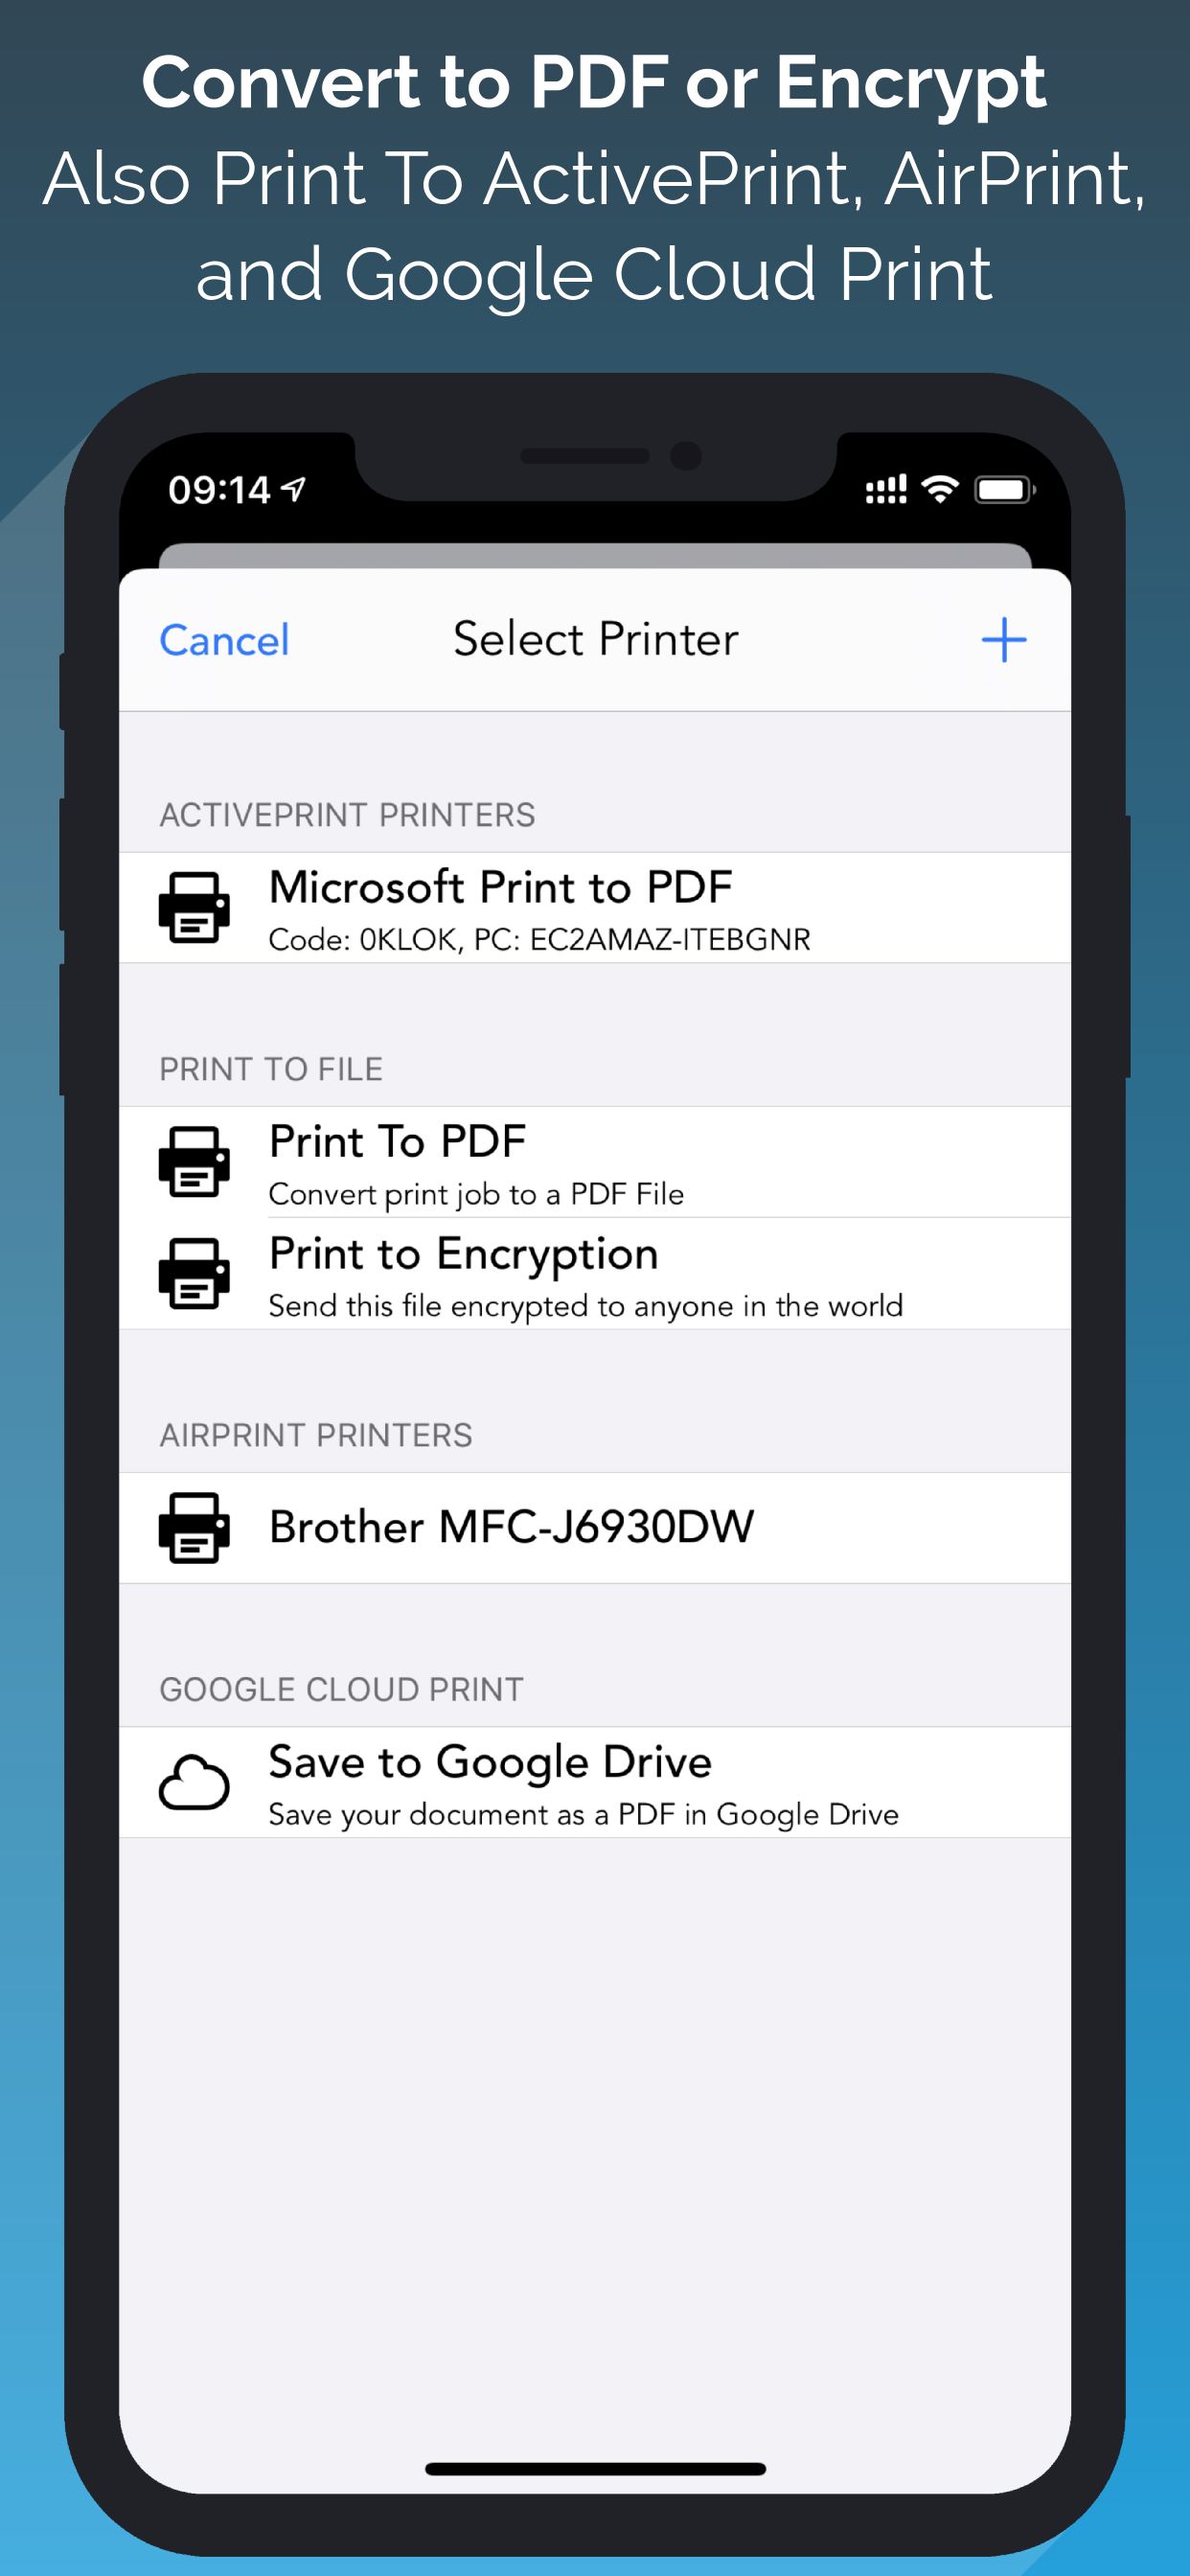 Convert to PDF or Encrypt with ActivePrint